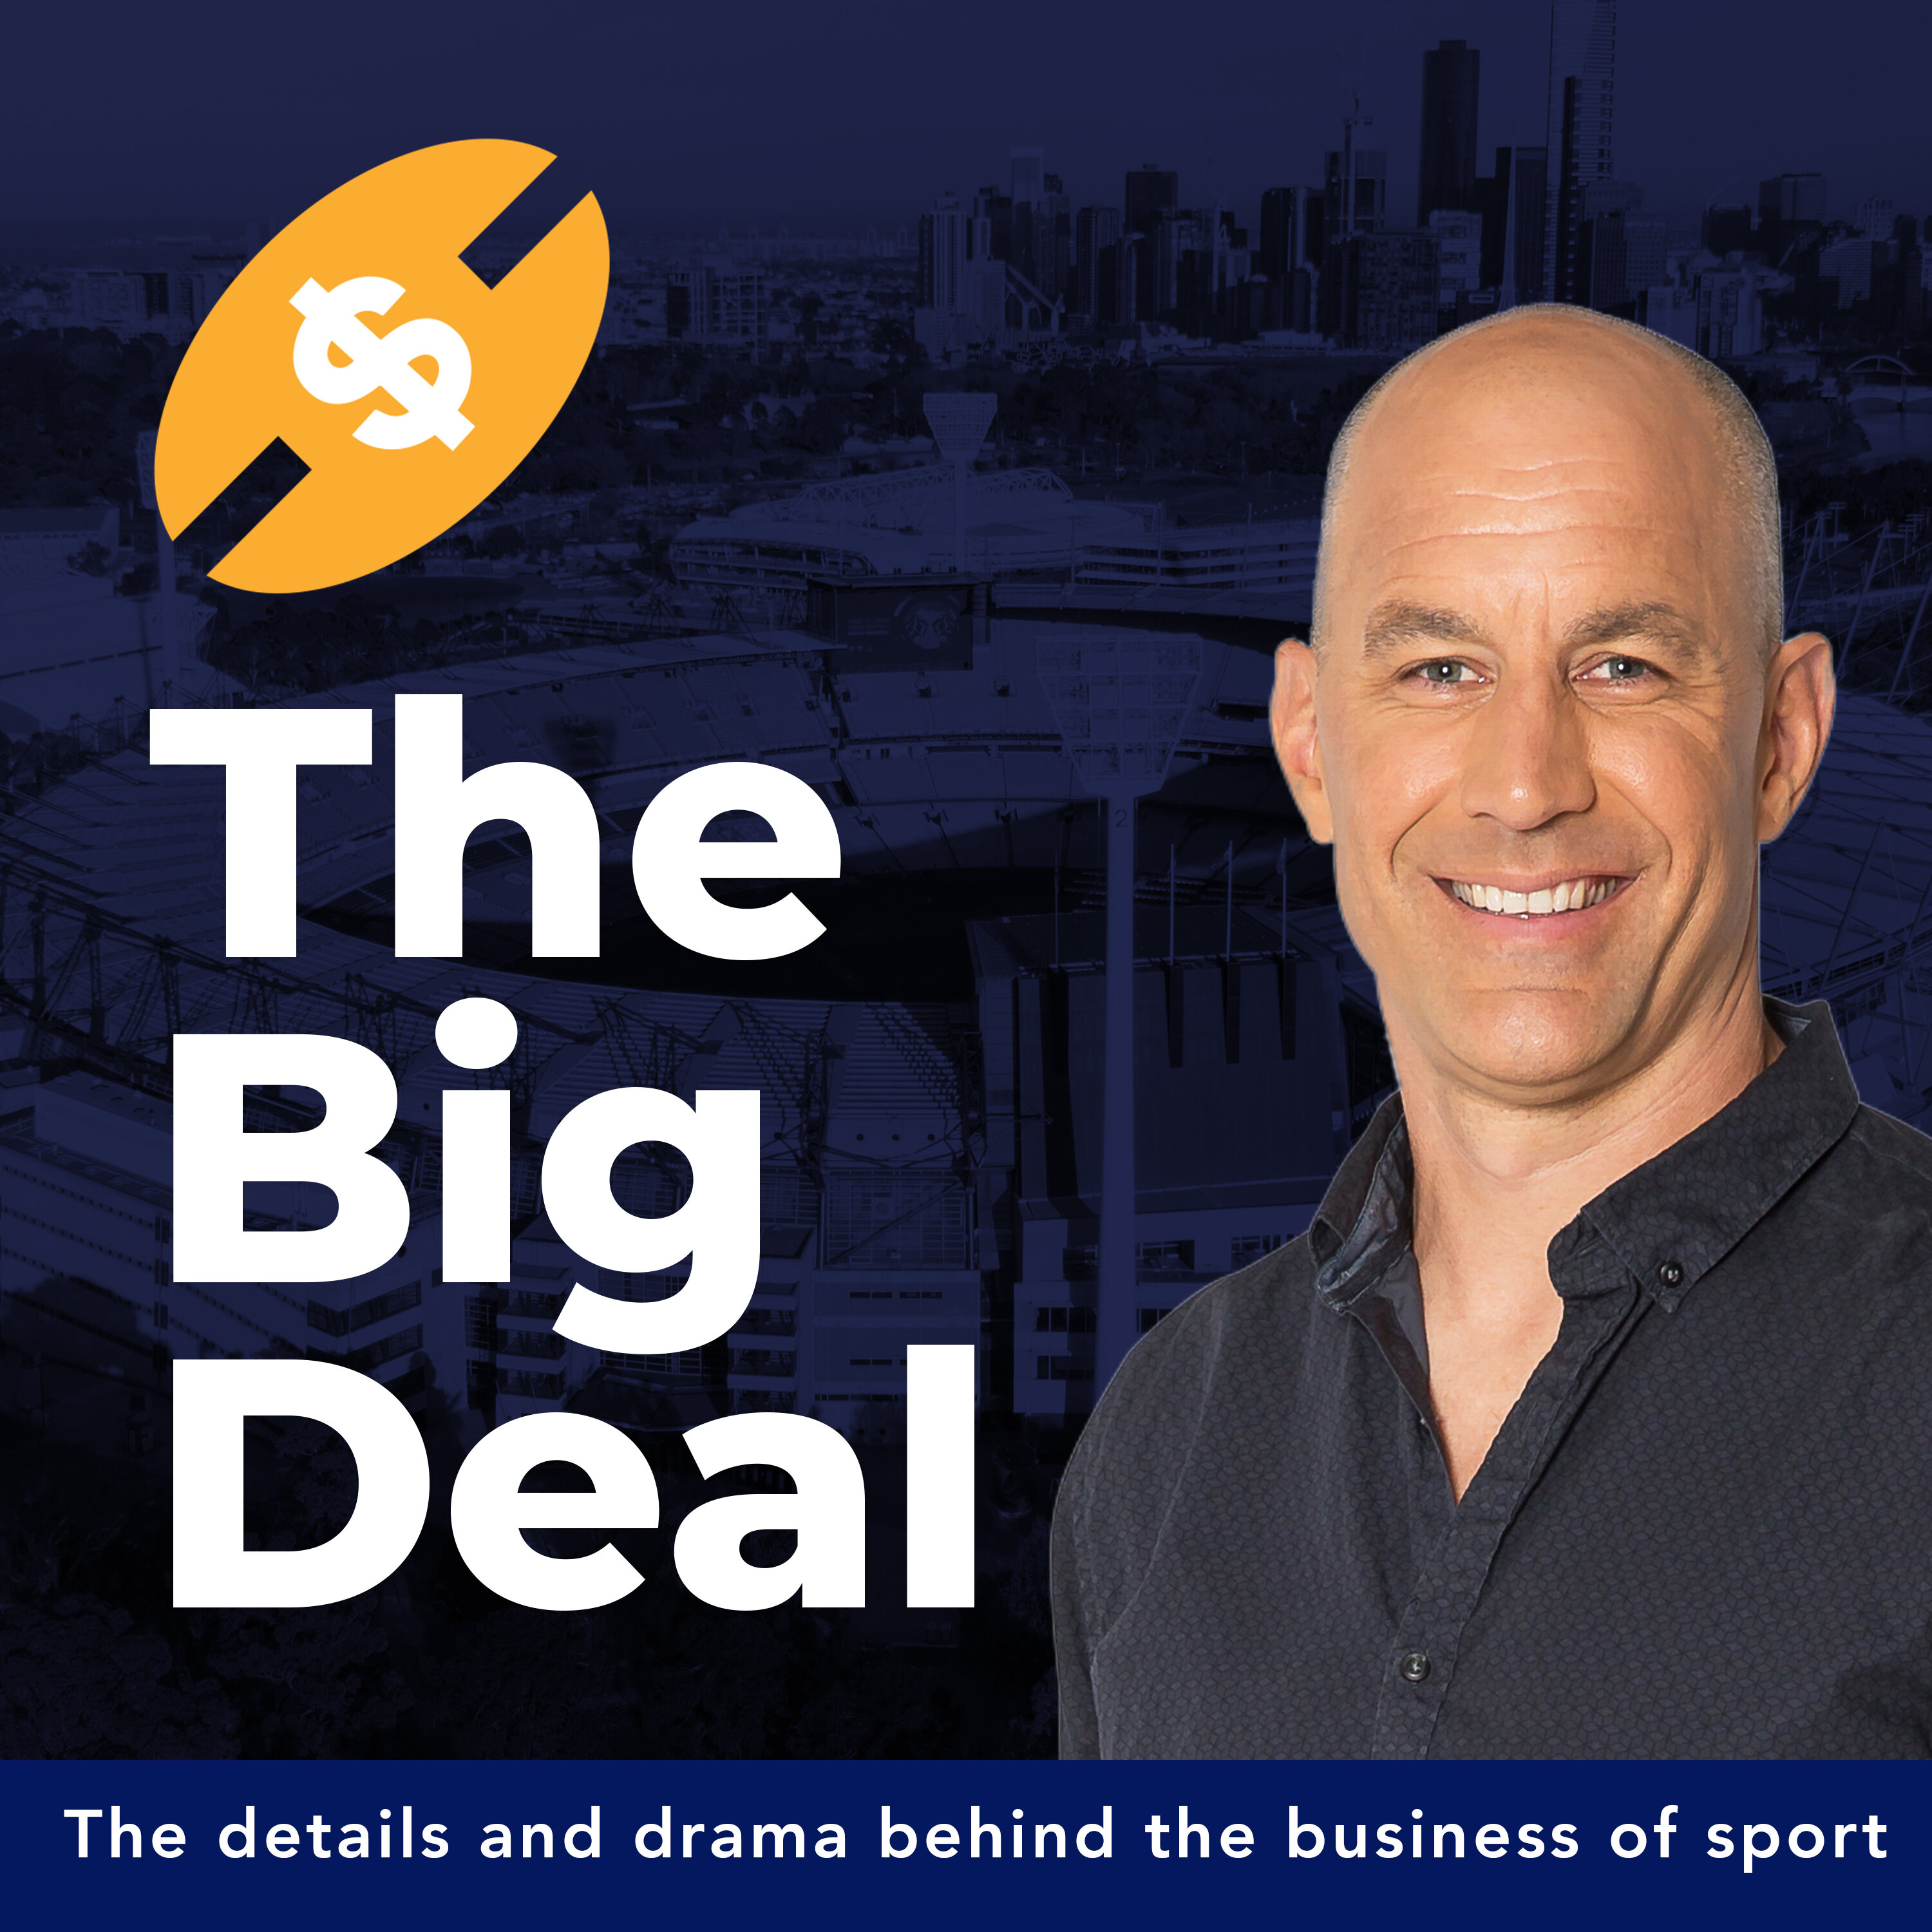 Sports biz wrap: AFL ratings winner, trade talk, netballers 'unemployed', A-League ownership concerns, Apple eyes F1, 'Swifties' take over NFL & more